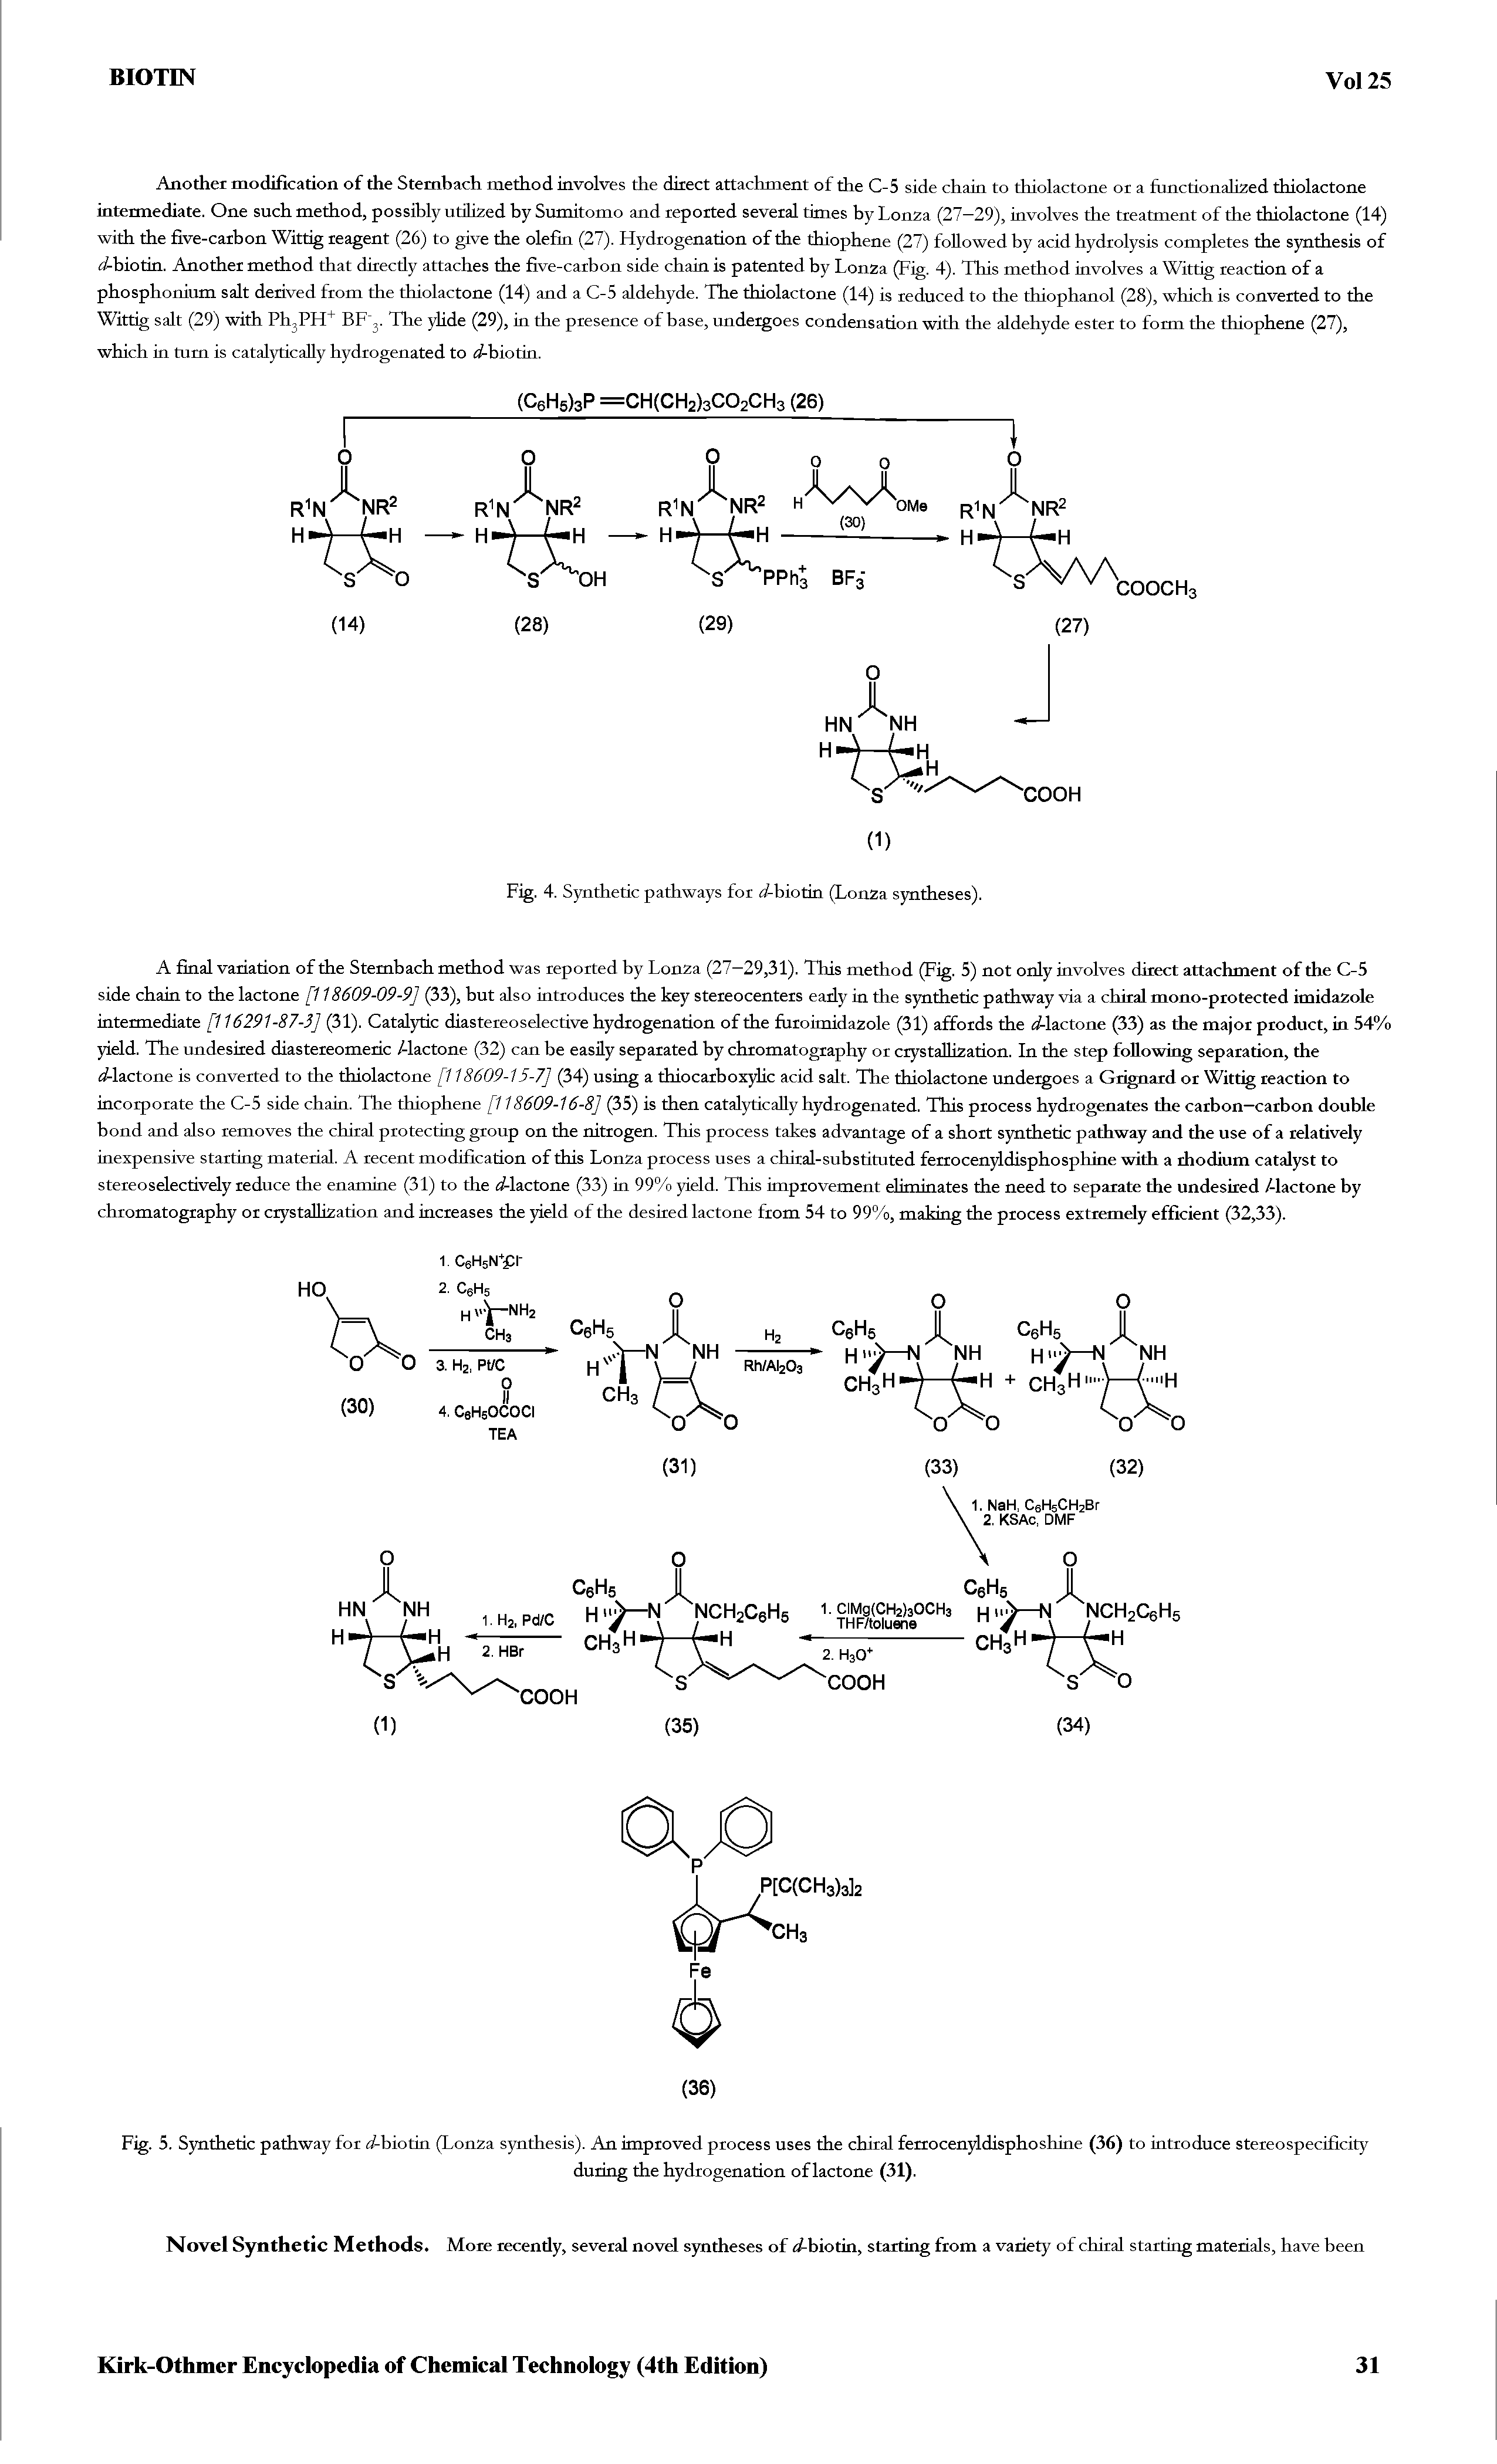 Fig. 5. Synthetic pathway for (/-biotin (Lonza synthesis). An improved process uses the chiral ferrocenyldisphoshine (36) to introduce stereospecificity...